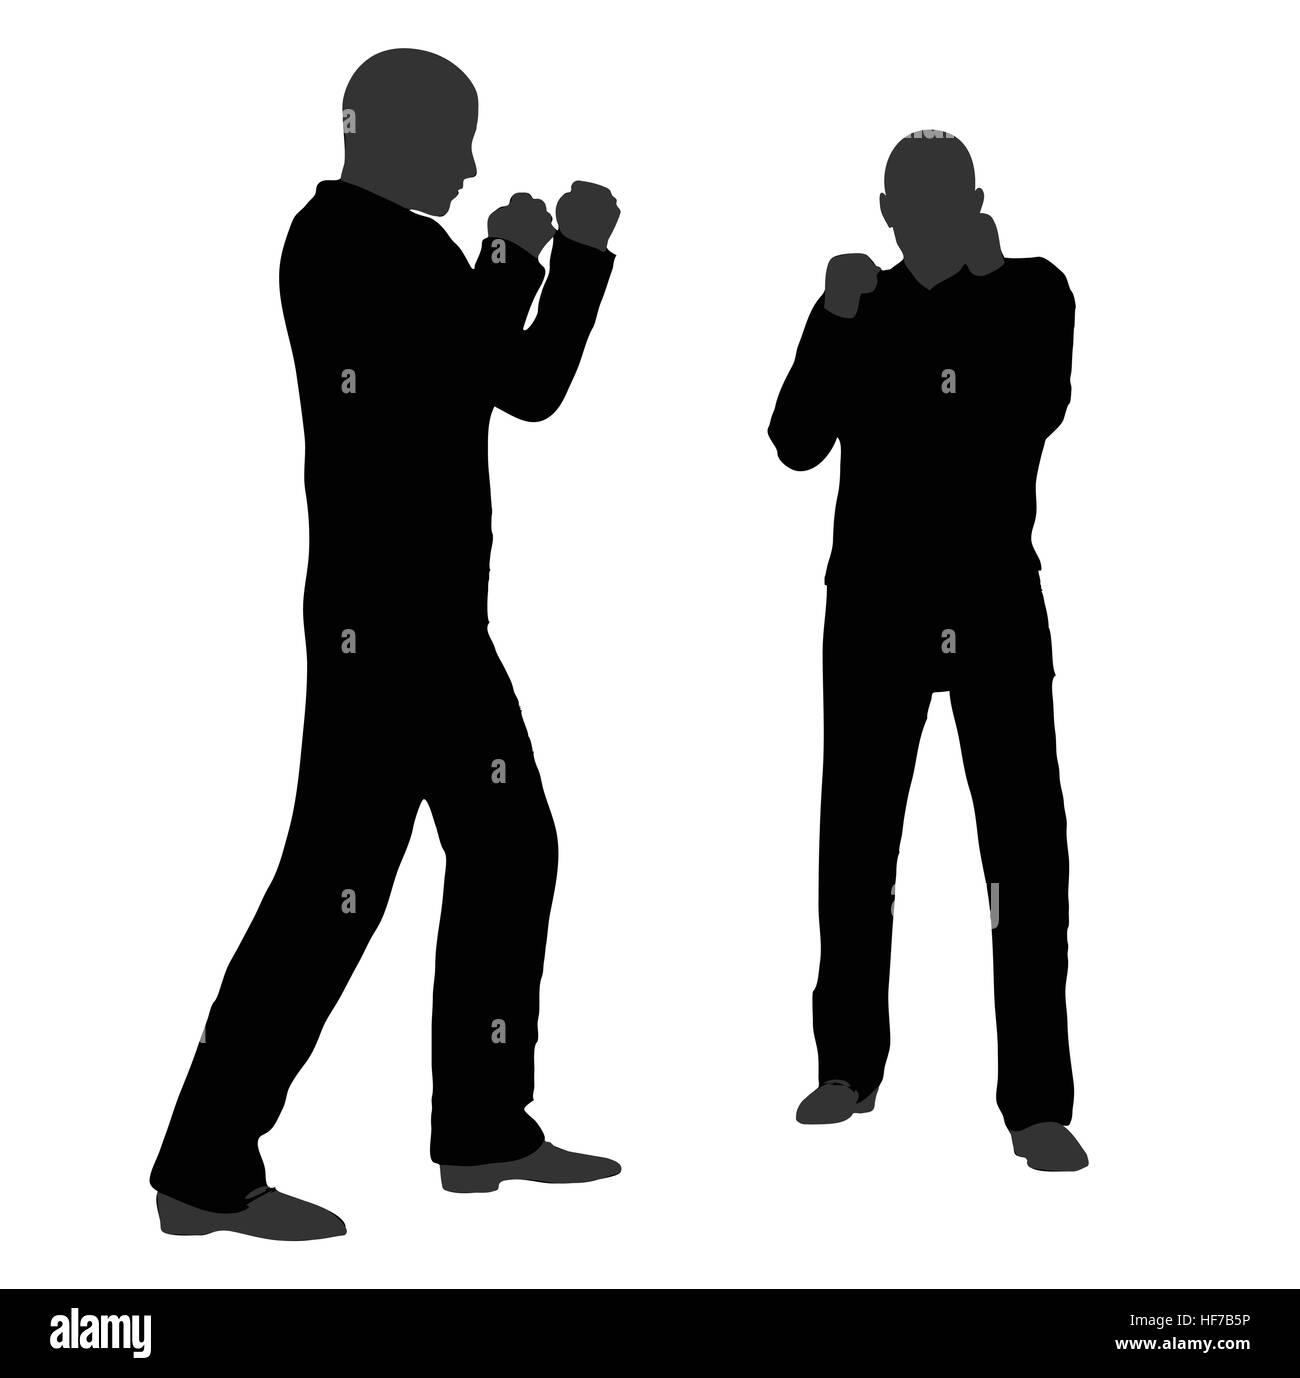 EPS 10 vector illustration of man in fight pose on white background Stock Vector